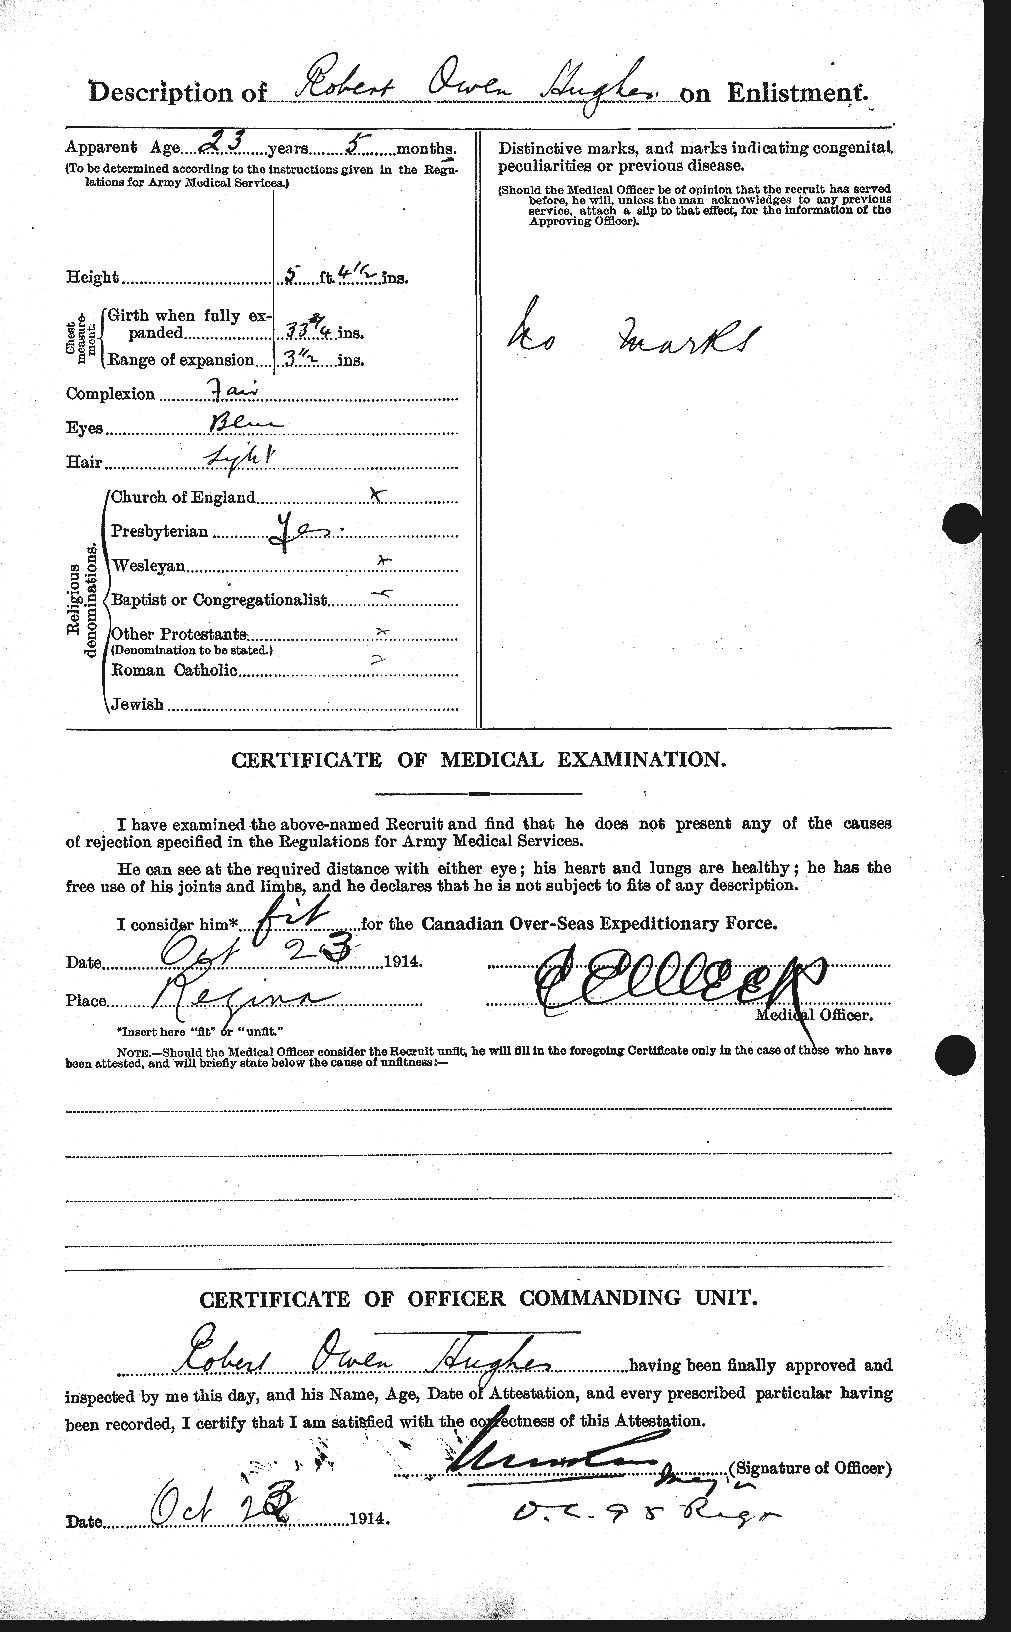 Personnel Records of the First World War - CEF 406620b